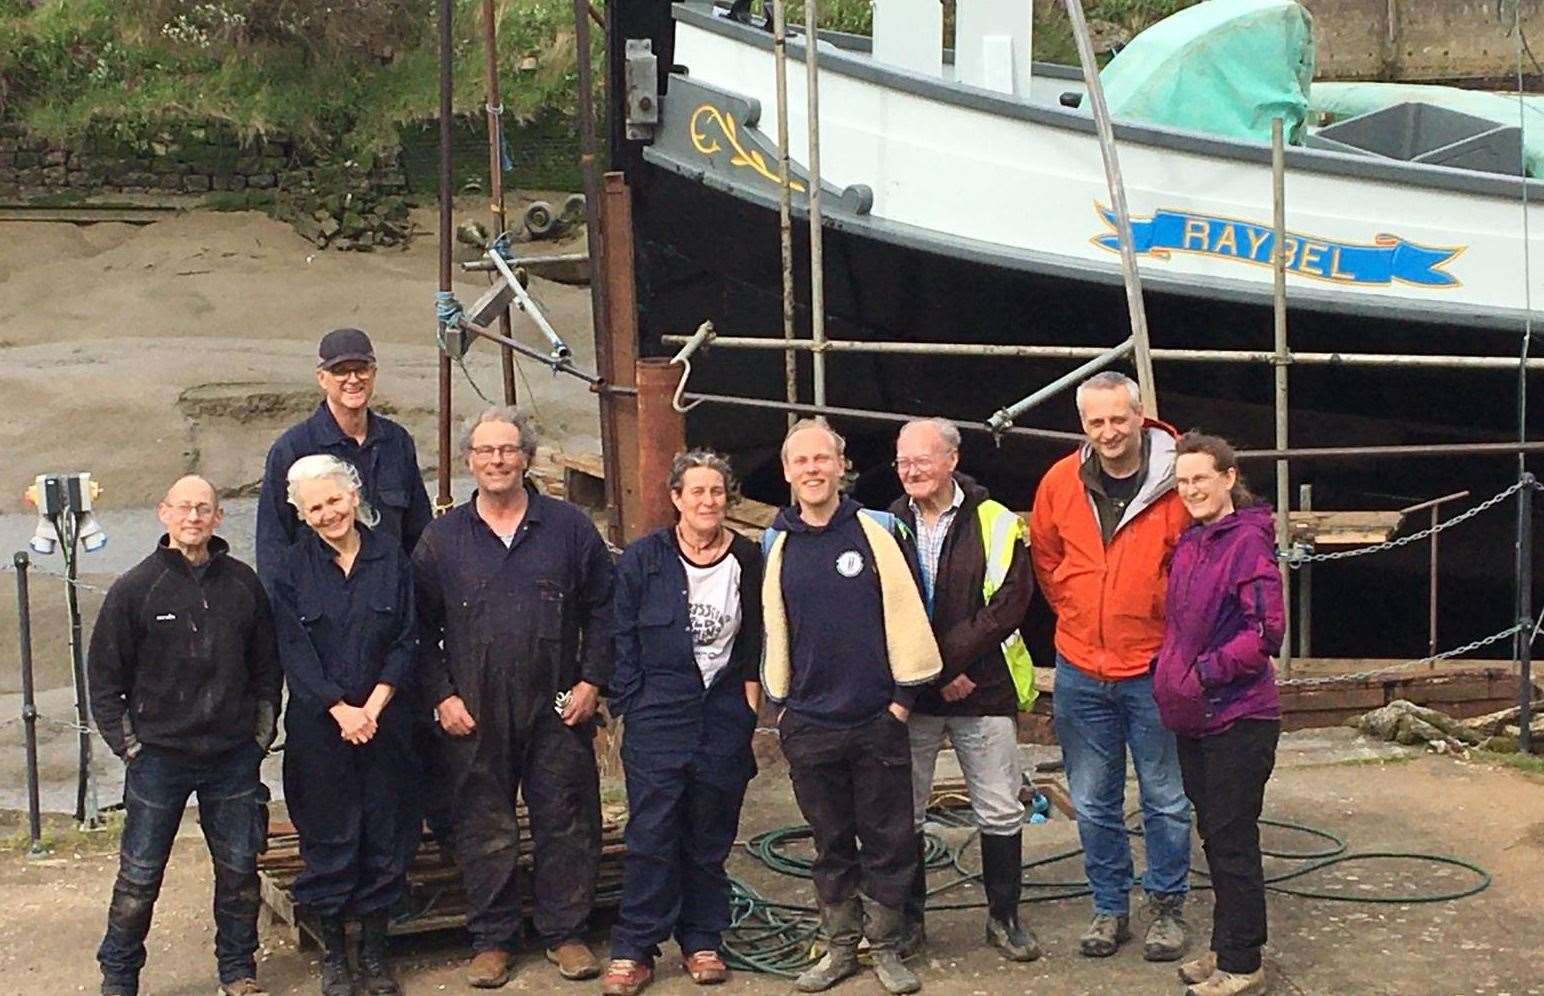 Some of the volunteers of the Raybel Charters ahead of the Raybel relaunch open day. Picture: Raybel Charters